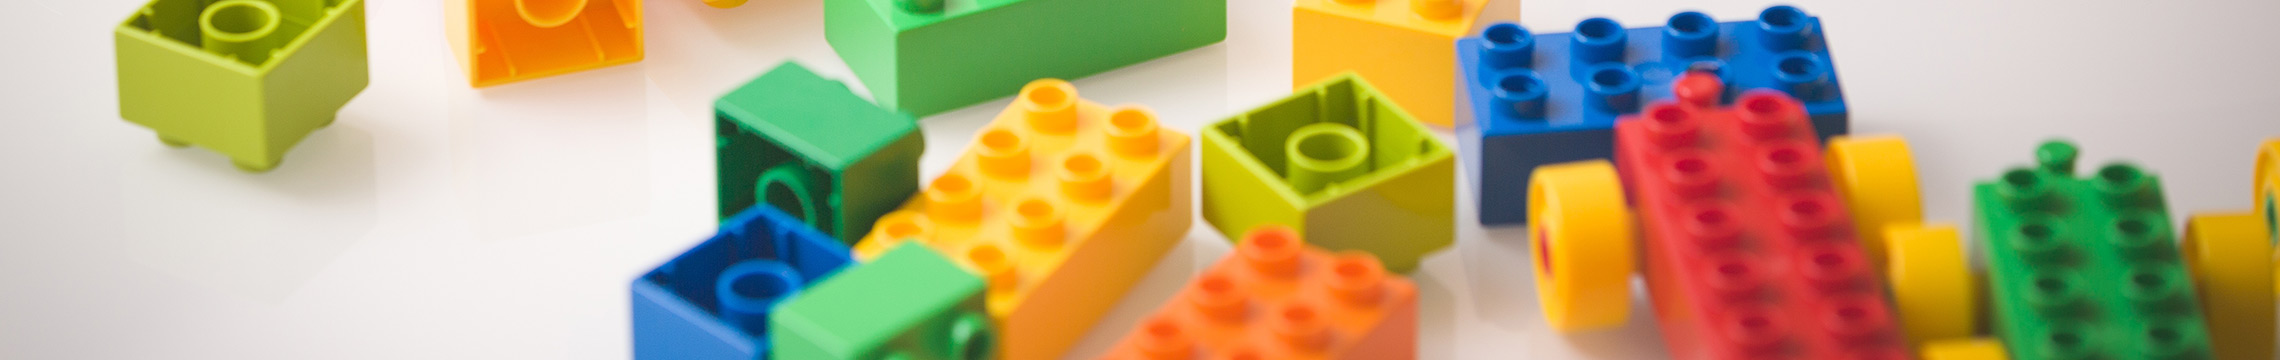 Multi-colored plastic building blocks scattered across a table